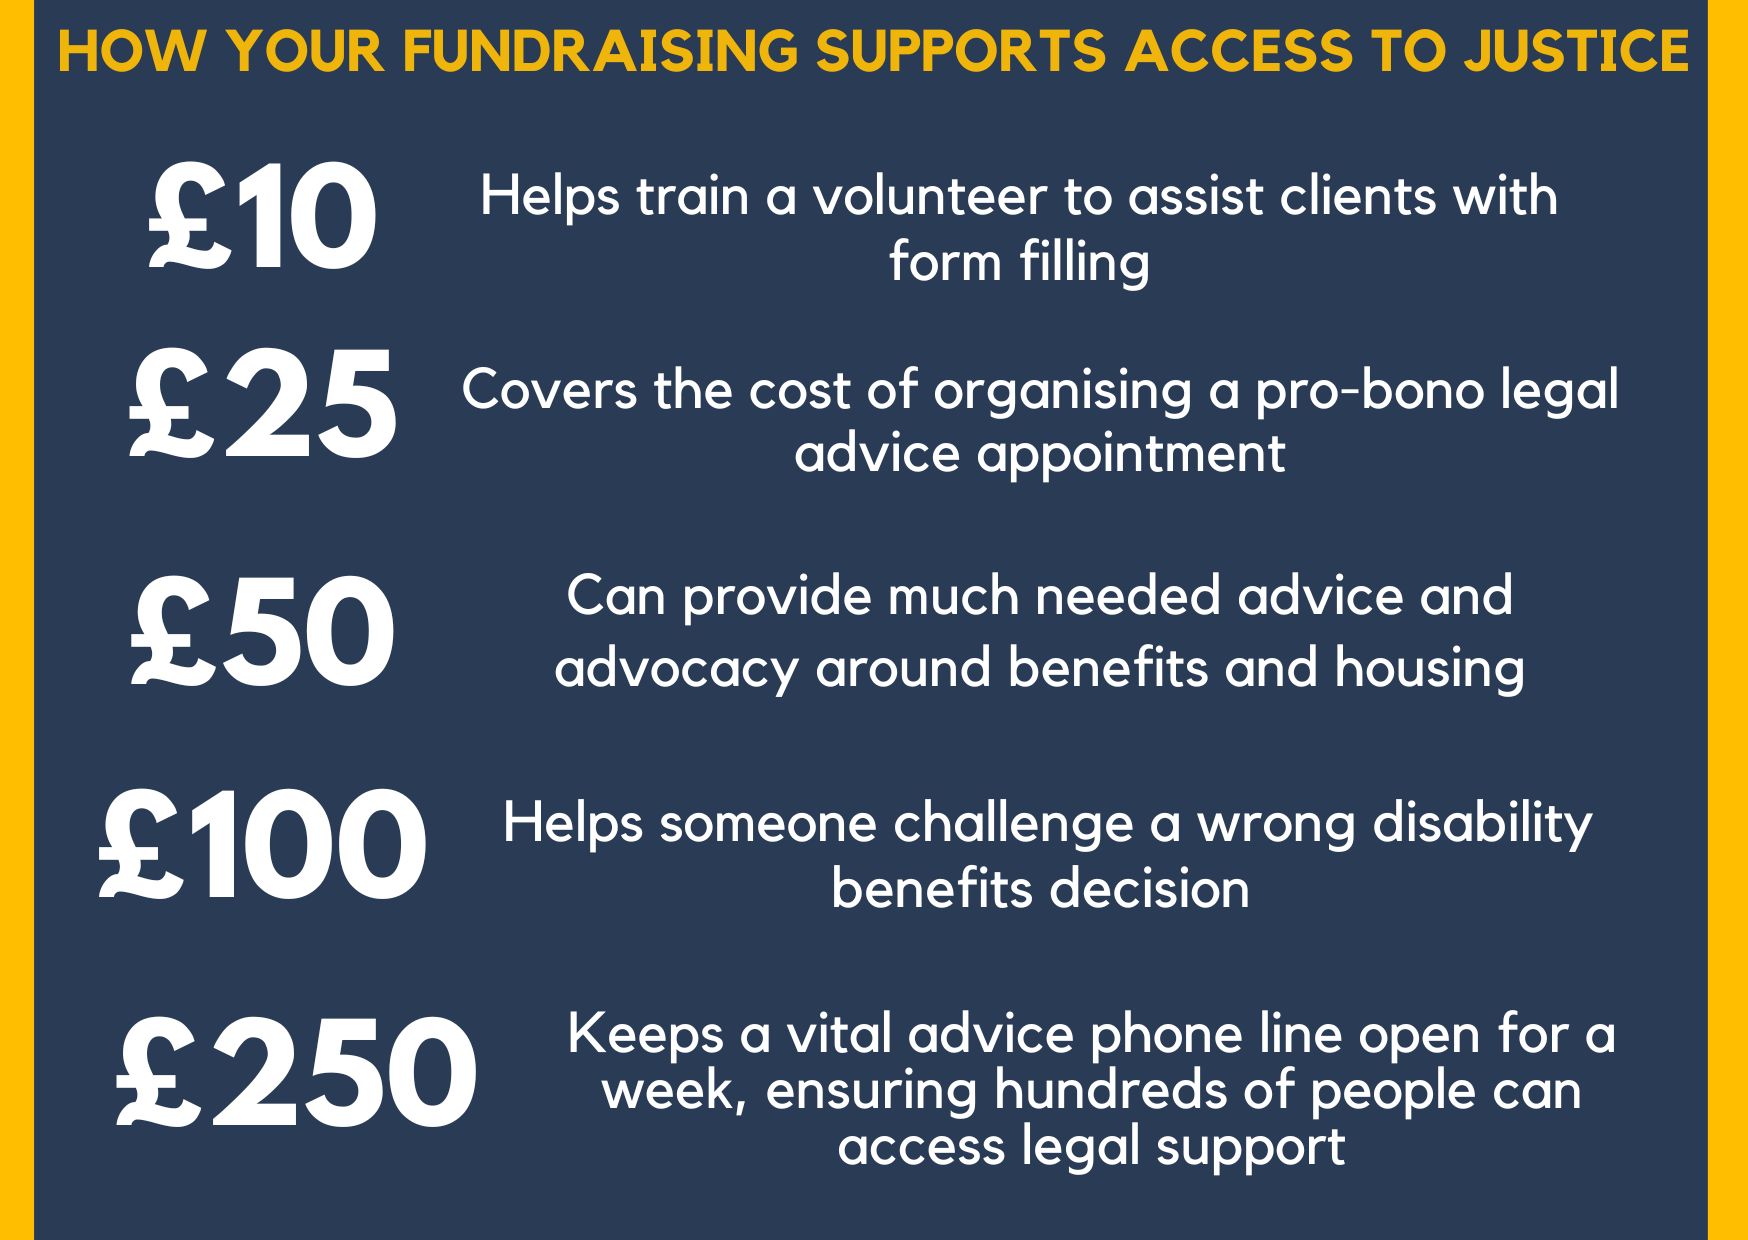 How your fundraising supports access to justice